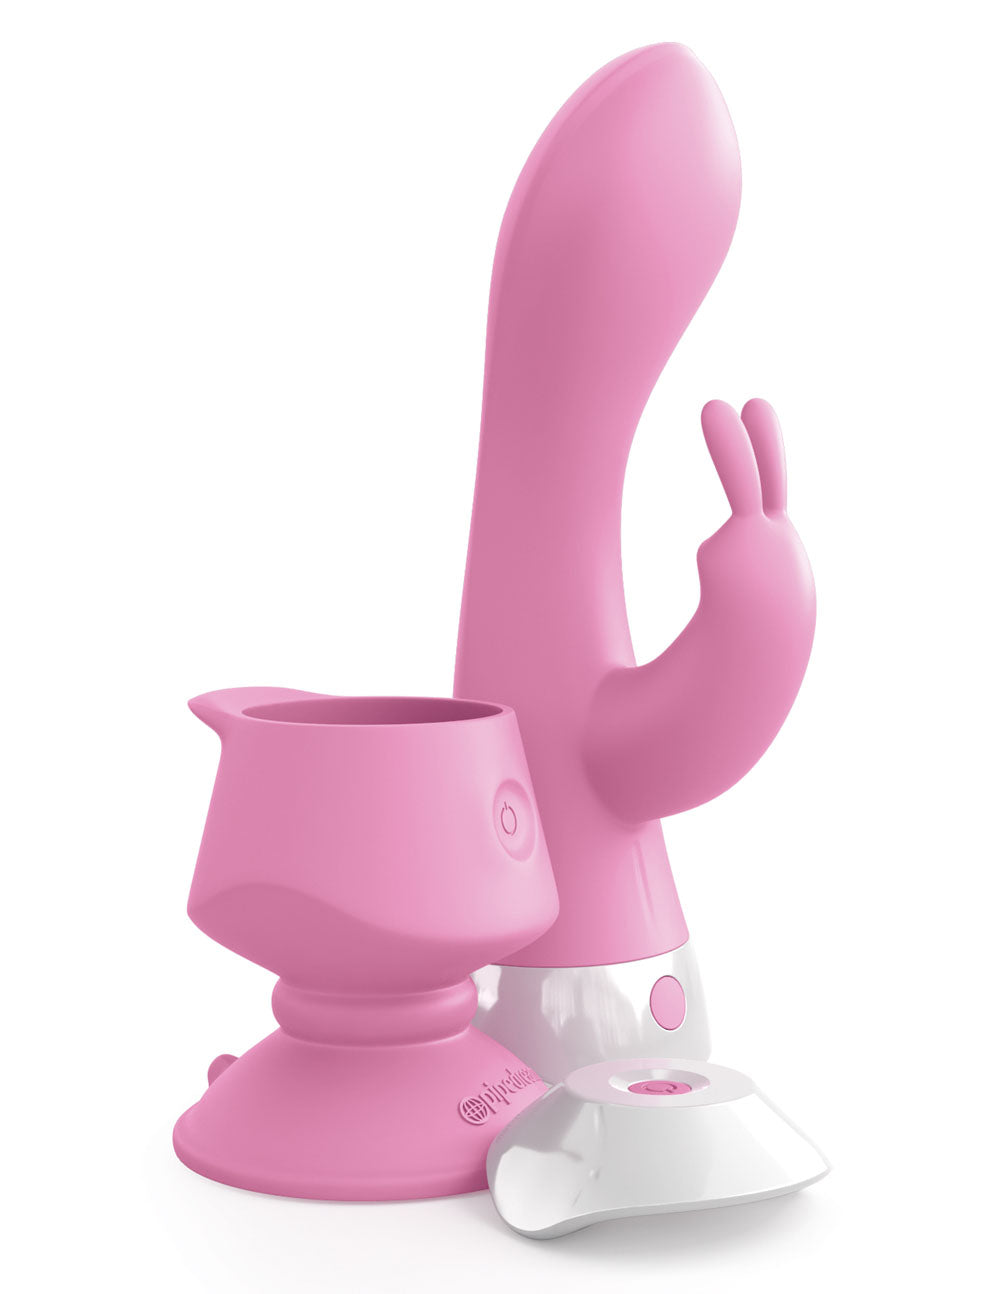 Threesome Wall Banger Rabbit Silicone Banger - Pink PD7072-00